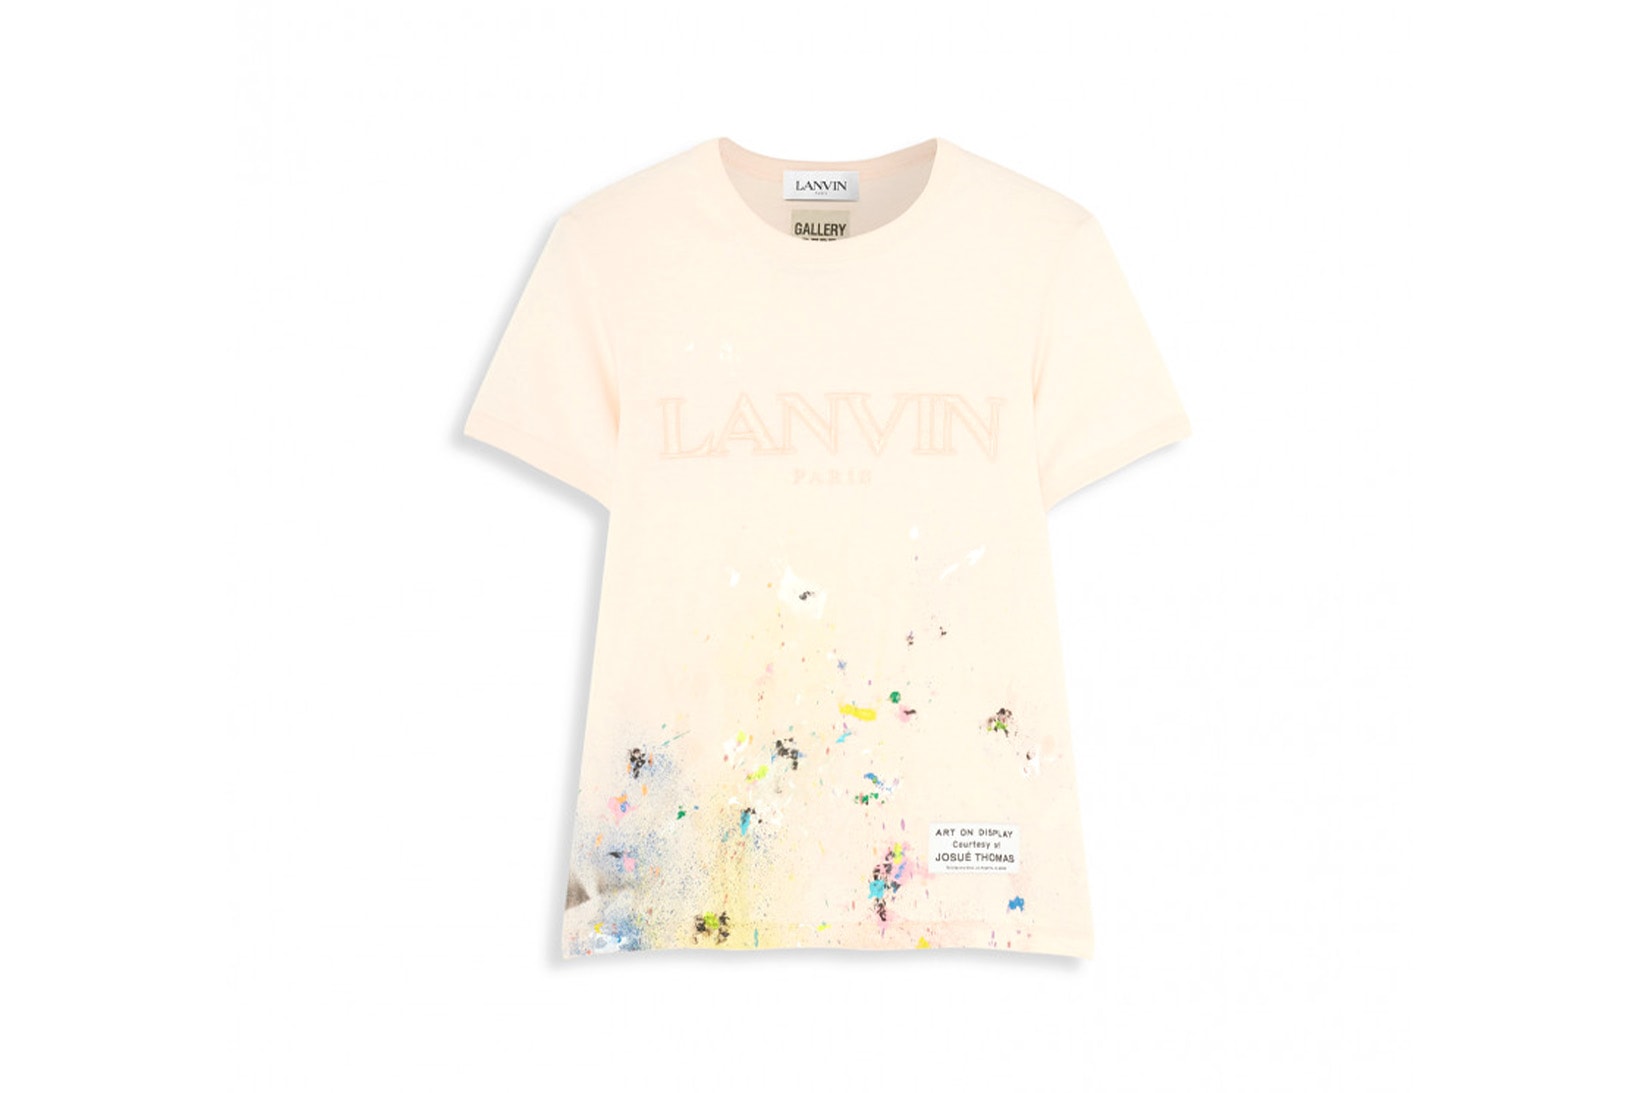 lanvin gallery dept collection hoodies sneakers t-shirts tees release info plain pink